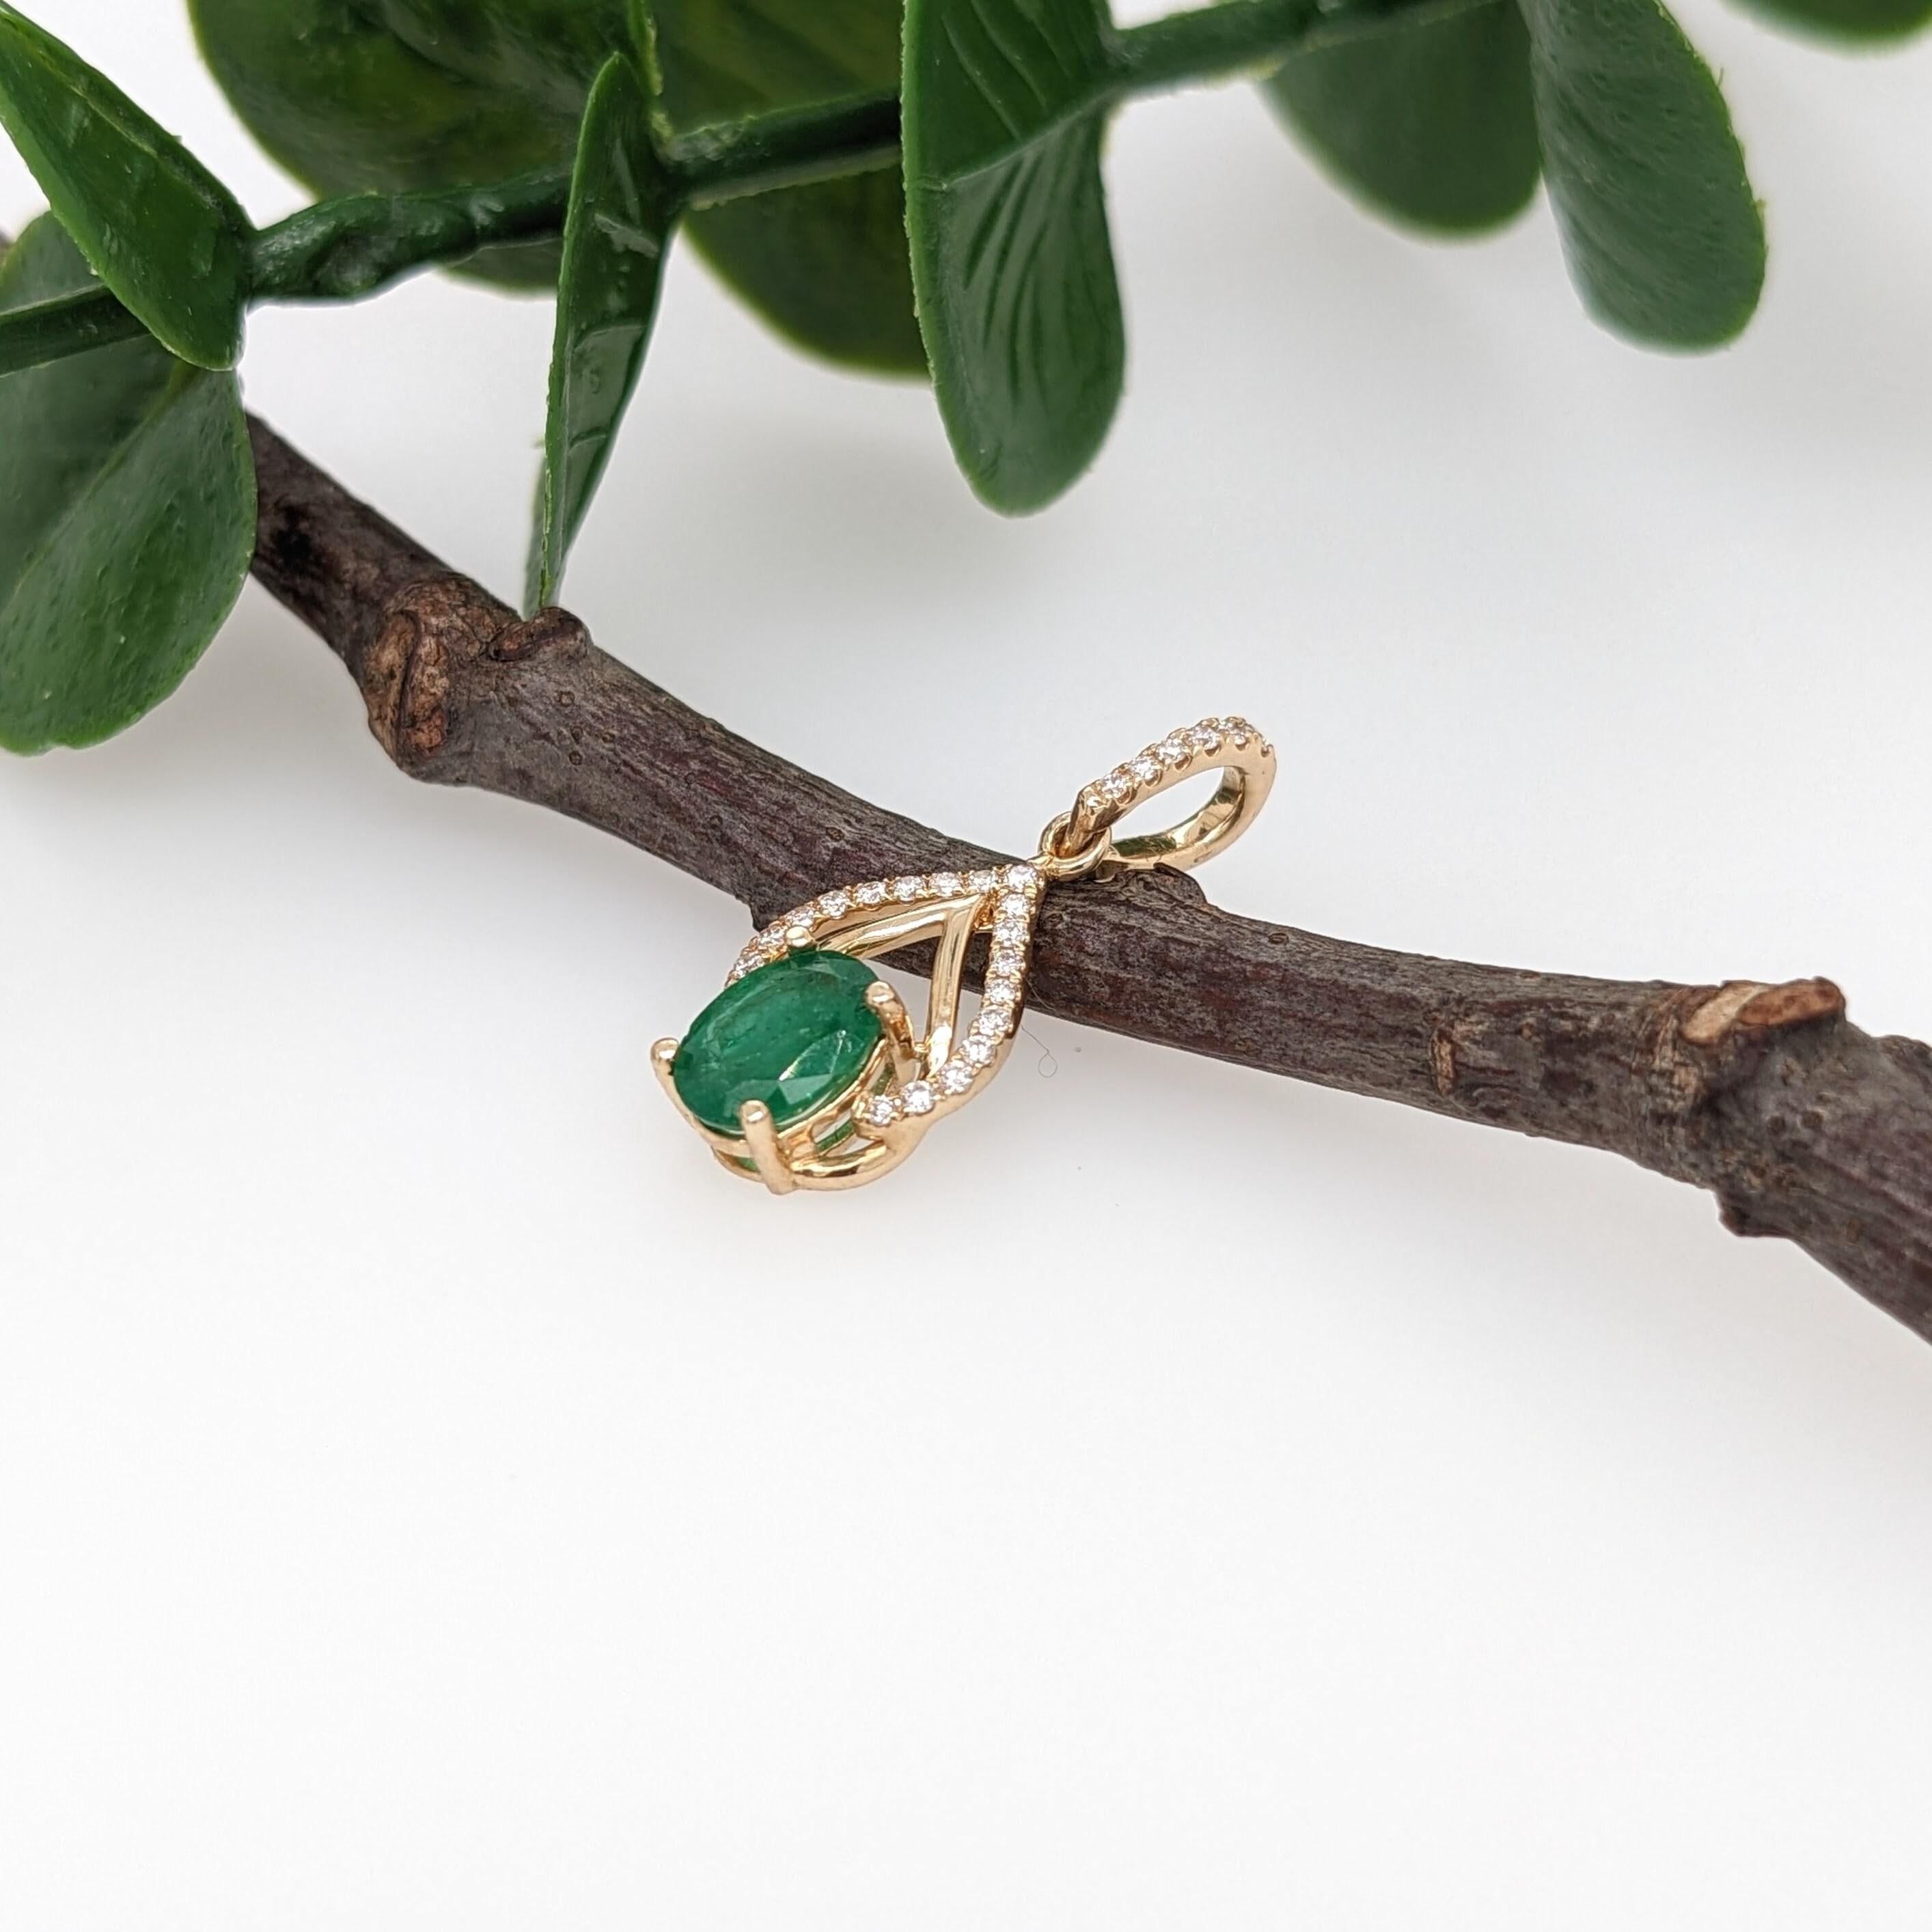 Add a flash of green with this cute and sparkly natural emerald pendant set in 14k solid yellow gold with natural diamond accents and a pave bail.  Available with a chain if you would like! :)

Specifications:

Item Type: Pendant
Center Stone: